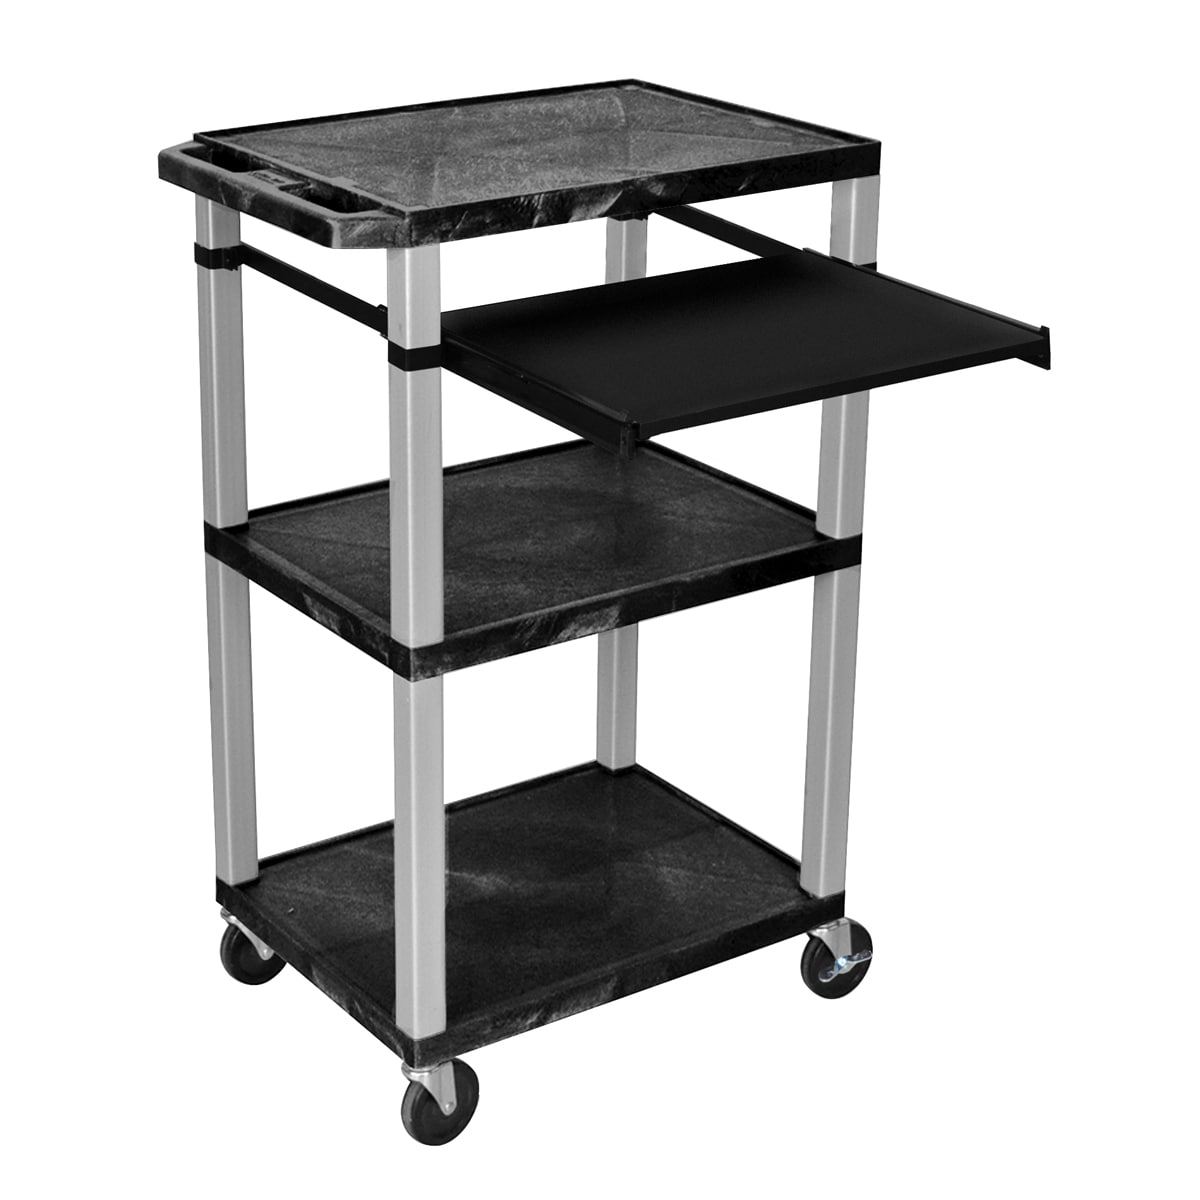 H.wilson 42 Inch High Black Open Shelf Wheeled Presentation Stand (BlackNickel finished LegsWheeledShelves Three (3) 18 inch x 24 inch shelves with a 0.25 inch safety retaining lip Keyboard tray with mousepad extenderModel WTPS42E NAssembly Required )